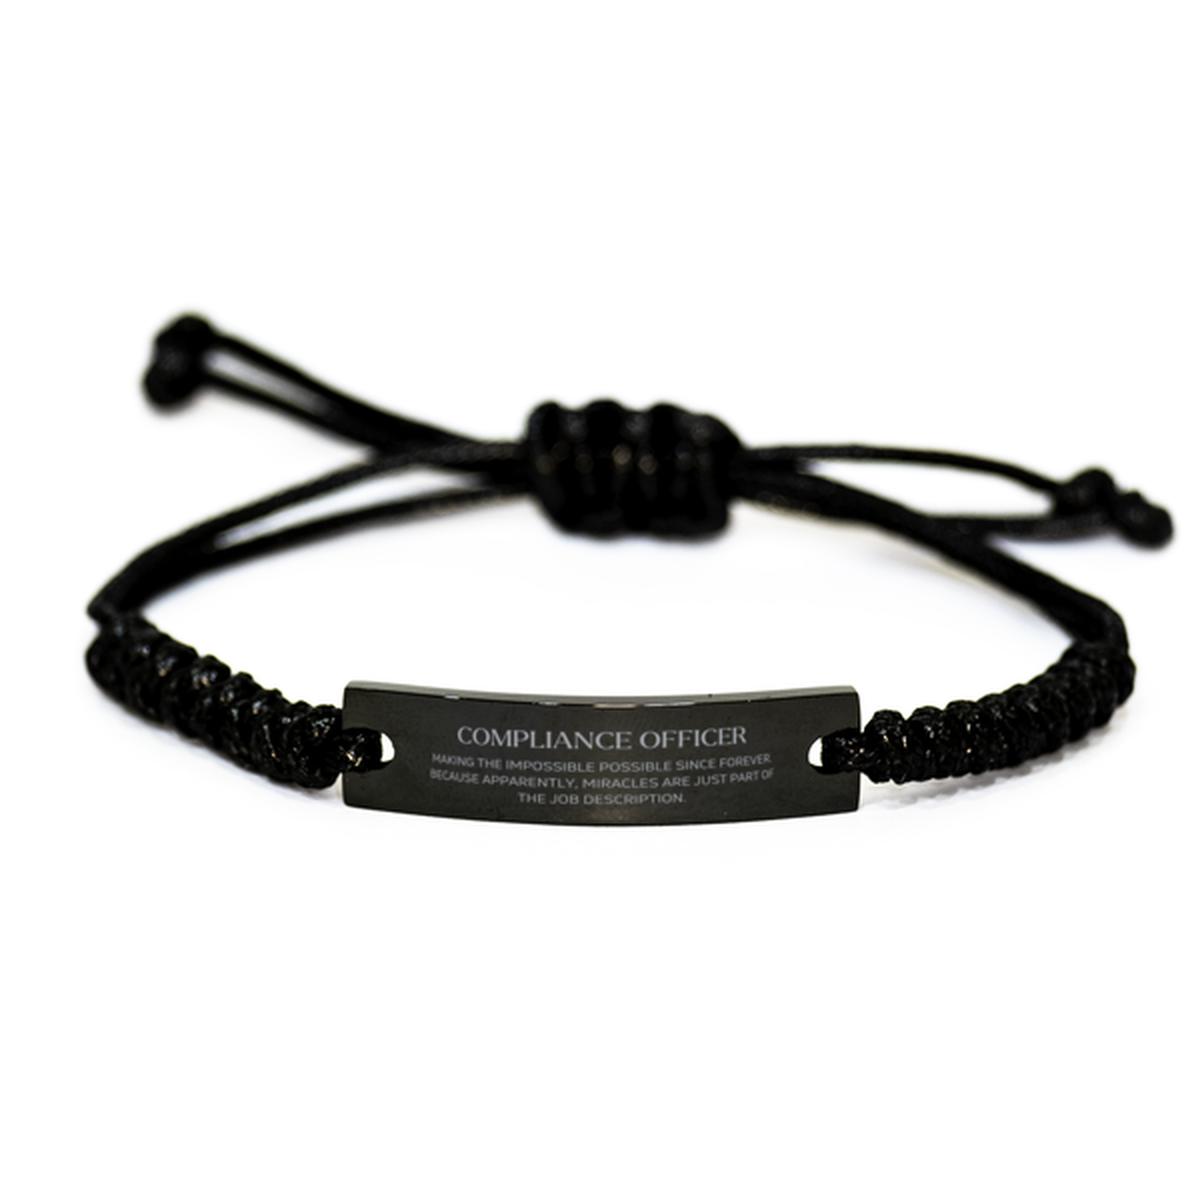 Funny Compliance Officer Gifts, Miracles are just part of the job description, Inspirational Birthday Black Rope Bracelet For Compliance Officer, Men, Women, Coworkers, Friends, Boss